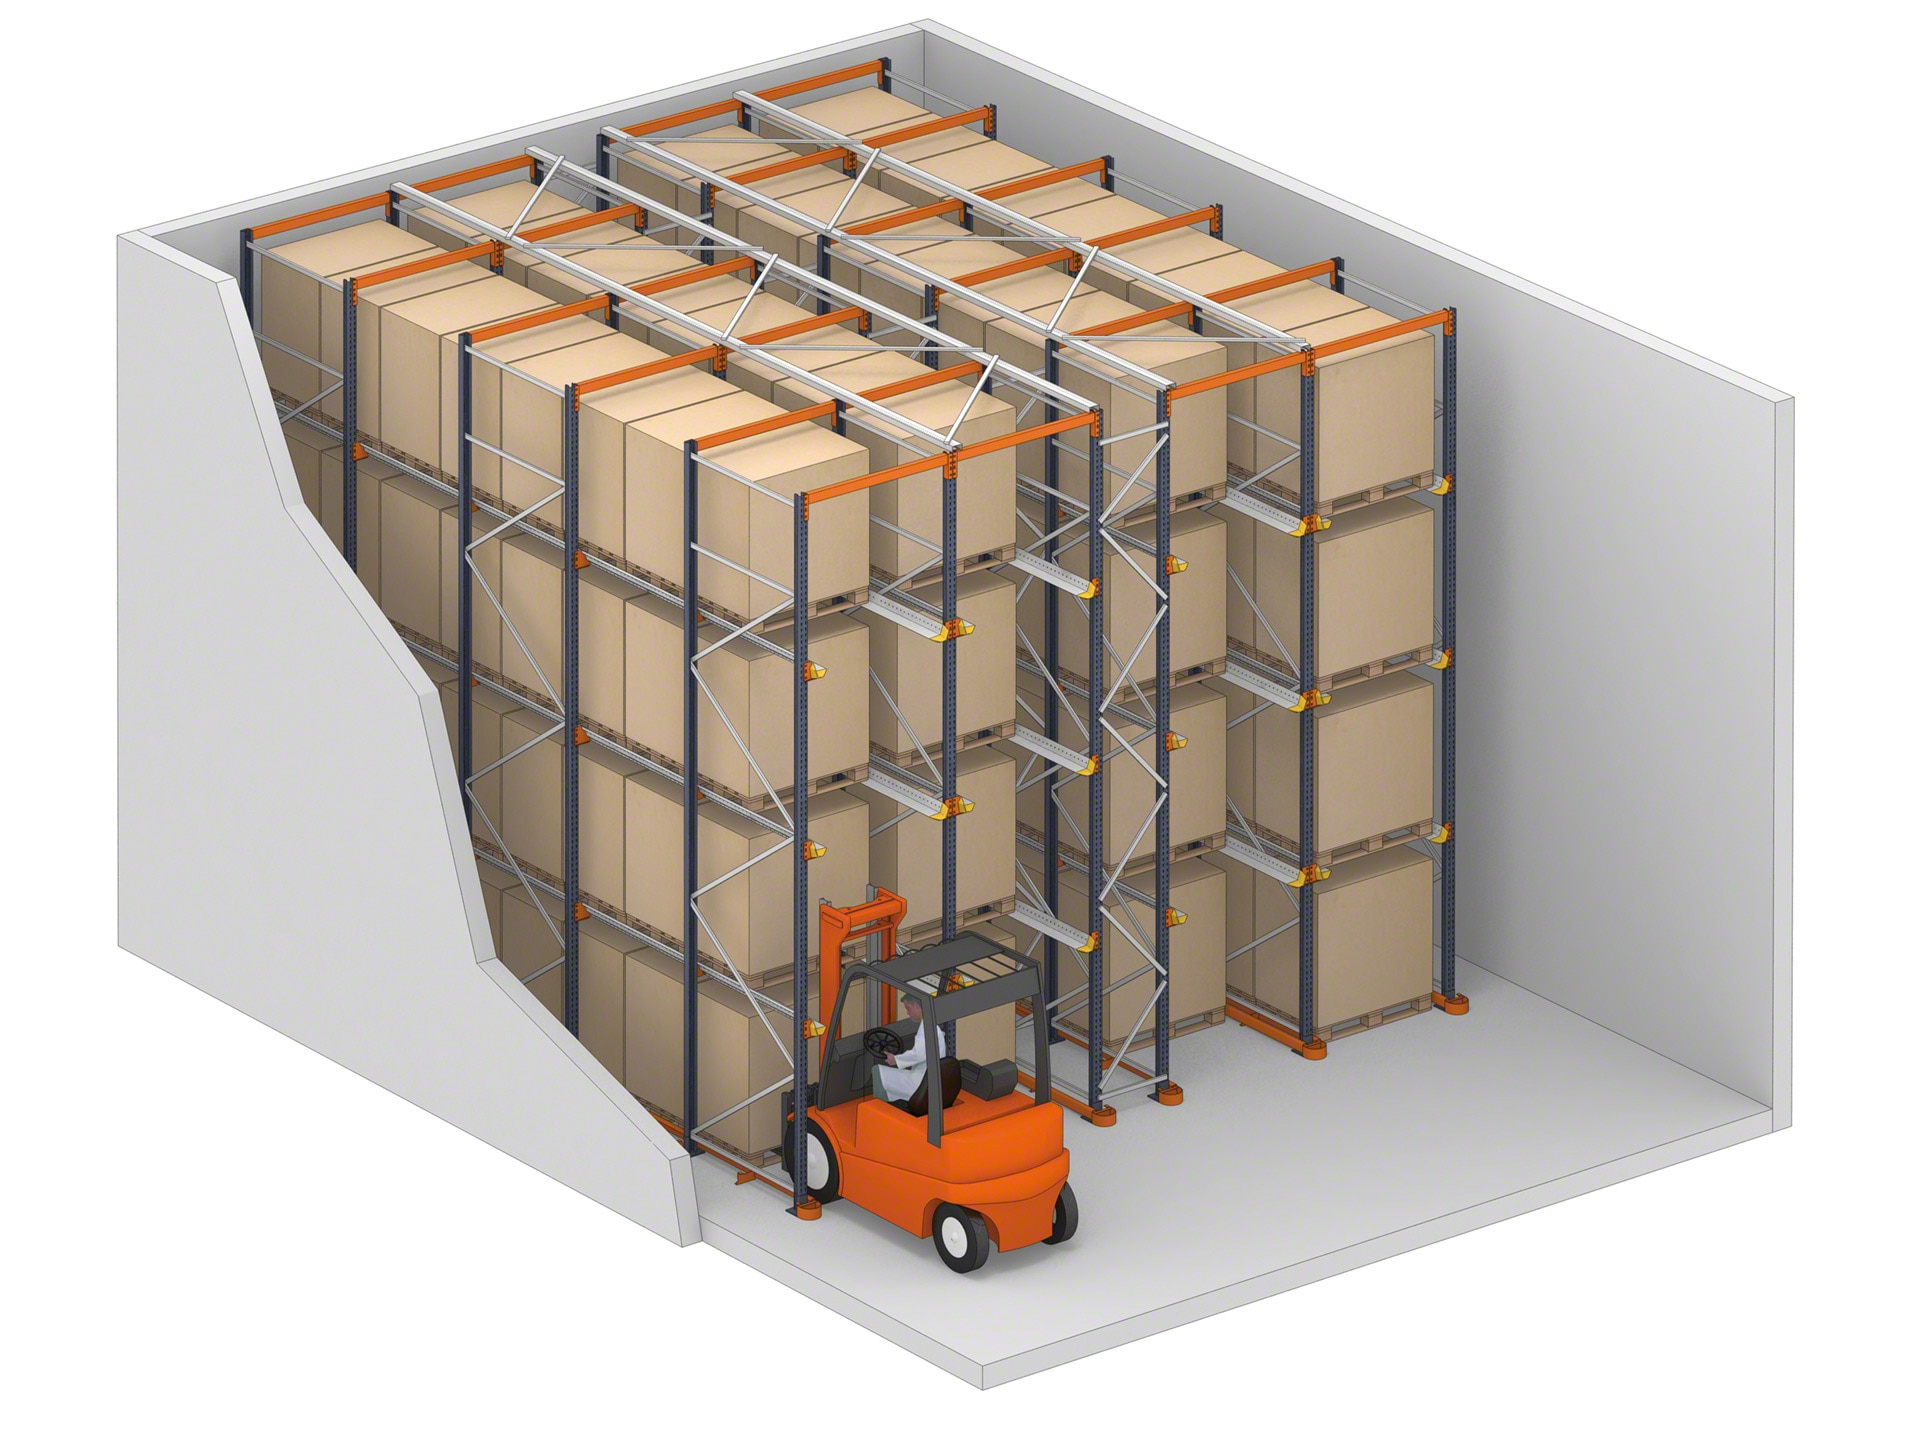 The drive-in system is a racking system in which forklifts can access the goods through its storage channels